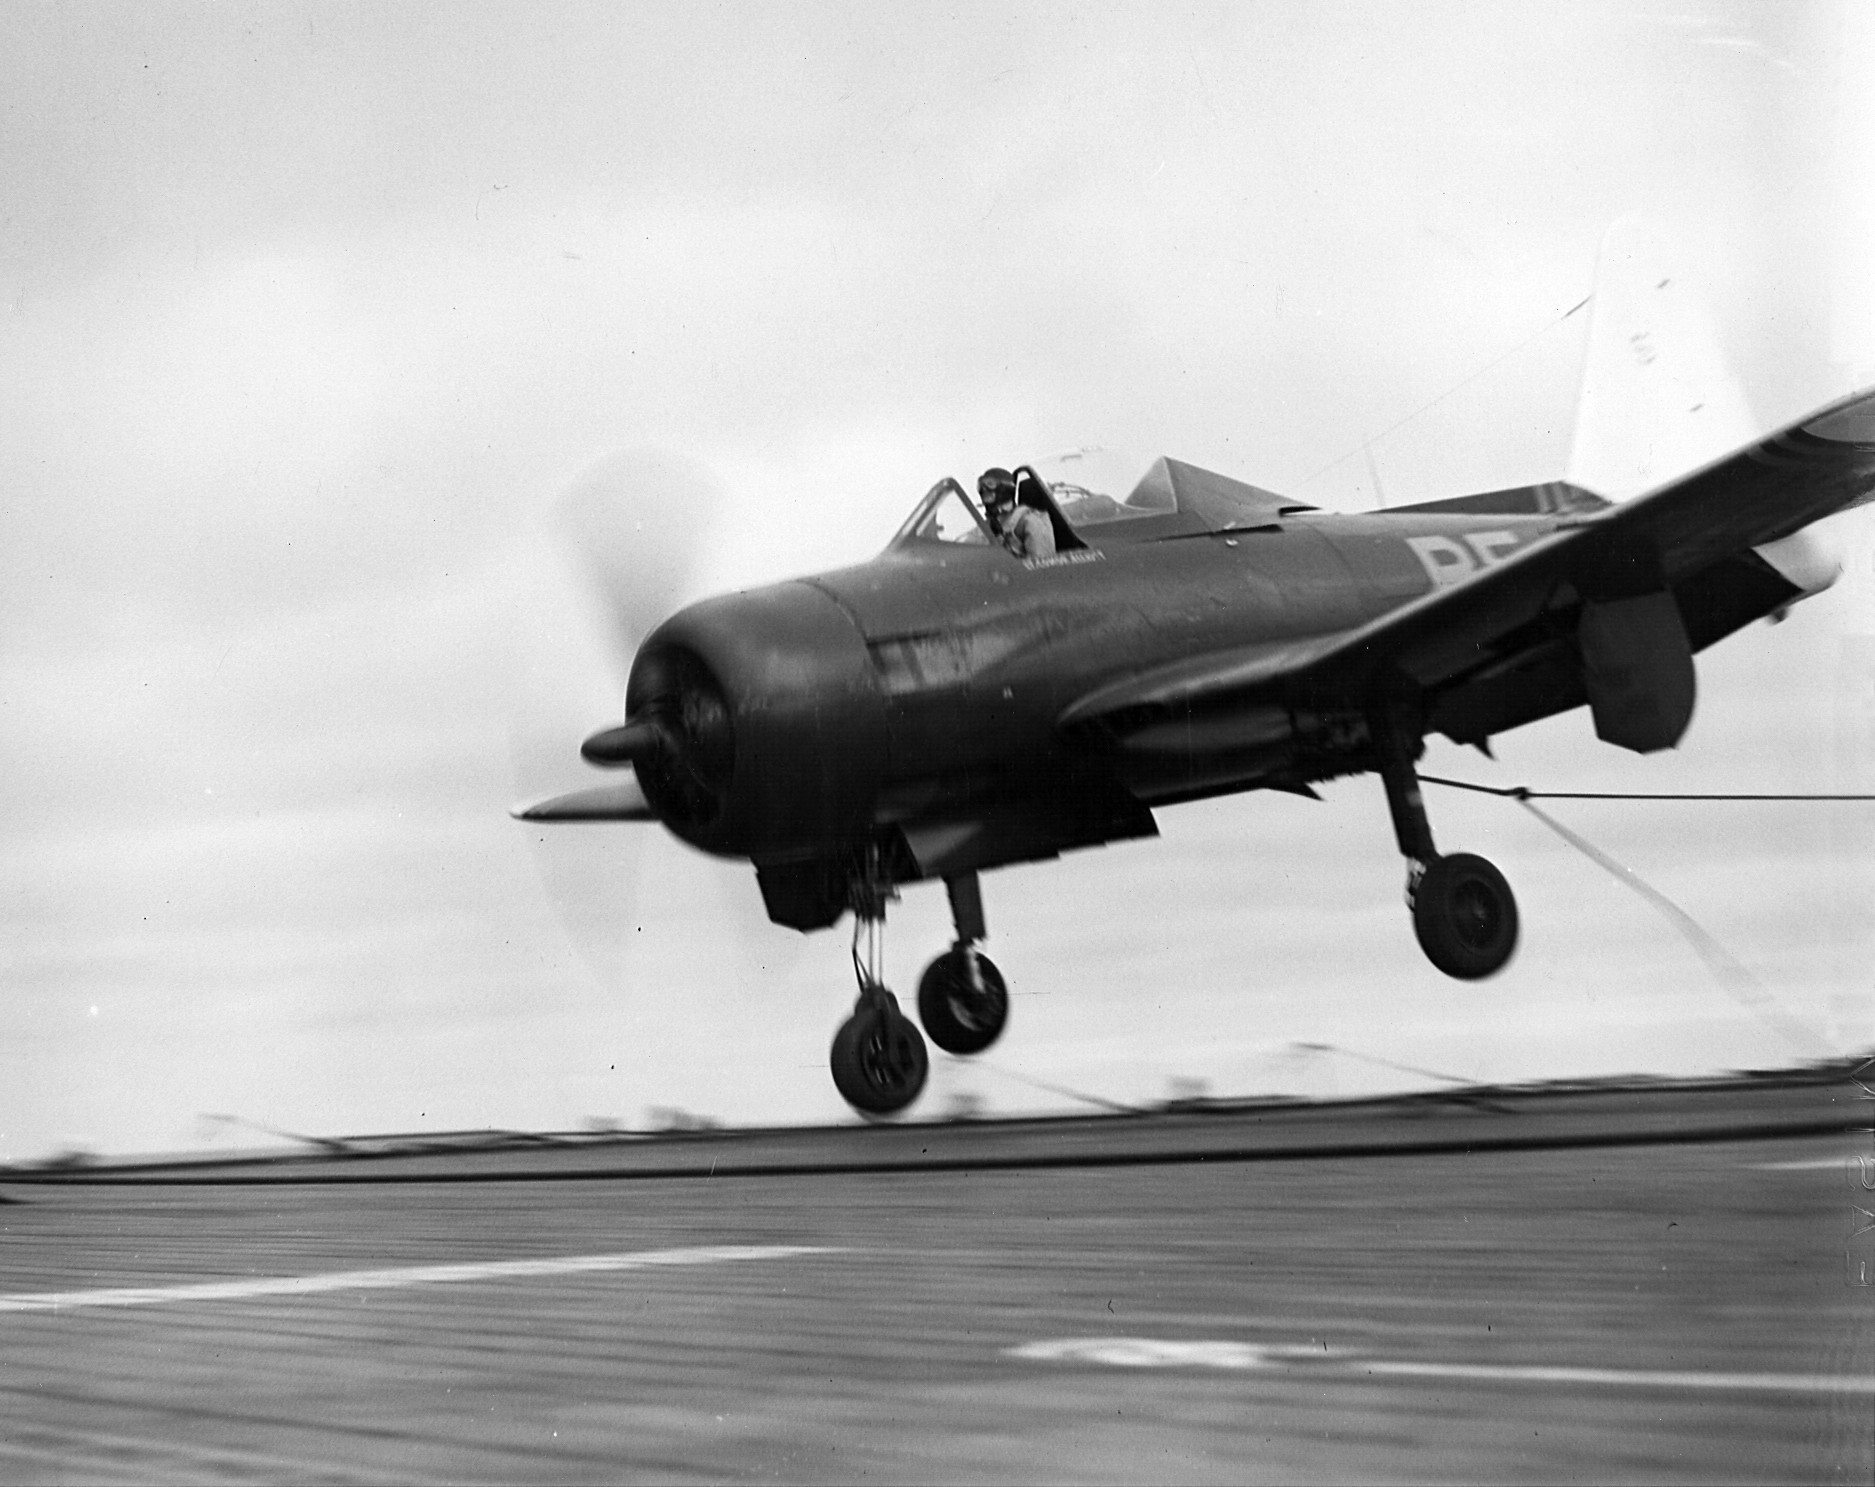 FR-1 Fireball fighter of US Navy squadron VF-41 landing aboard escort carrier USS Bairoko, 13 Mar 1946; this aircraft's nose gear would collapse moments after this photo was taken